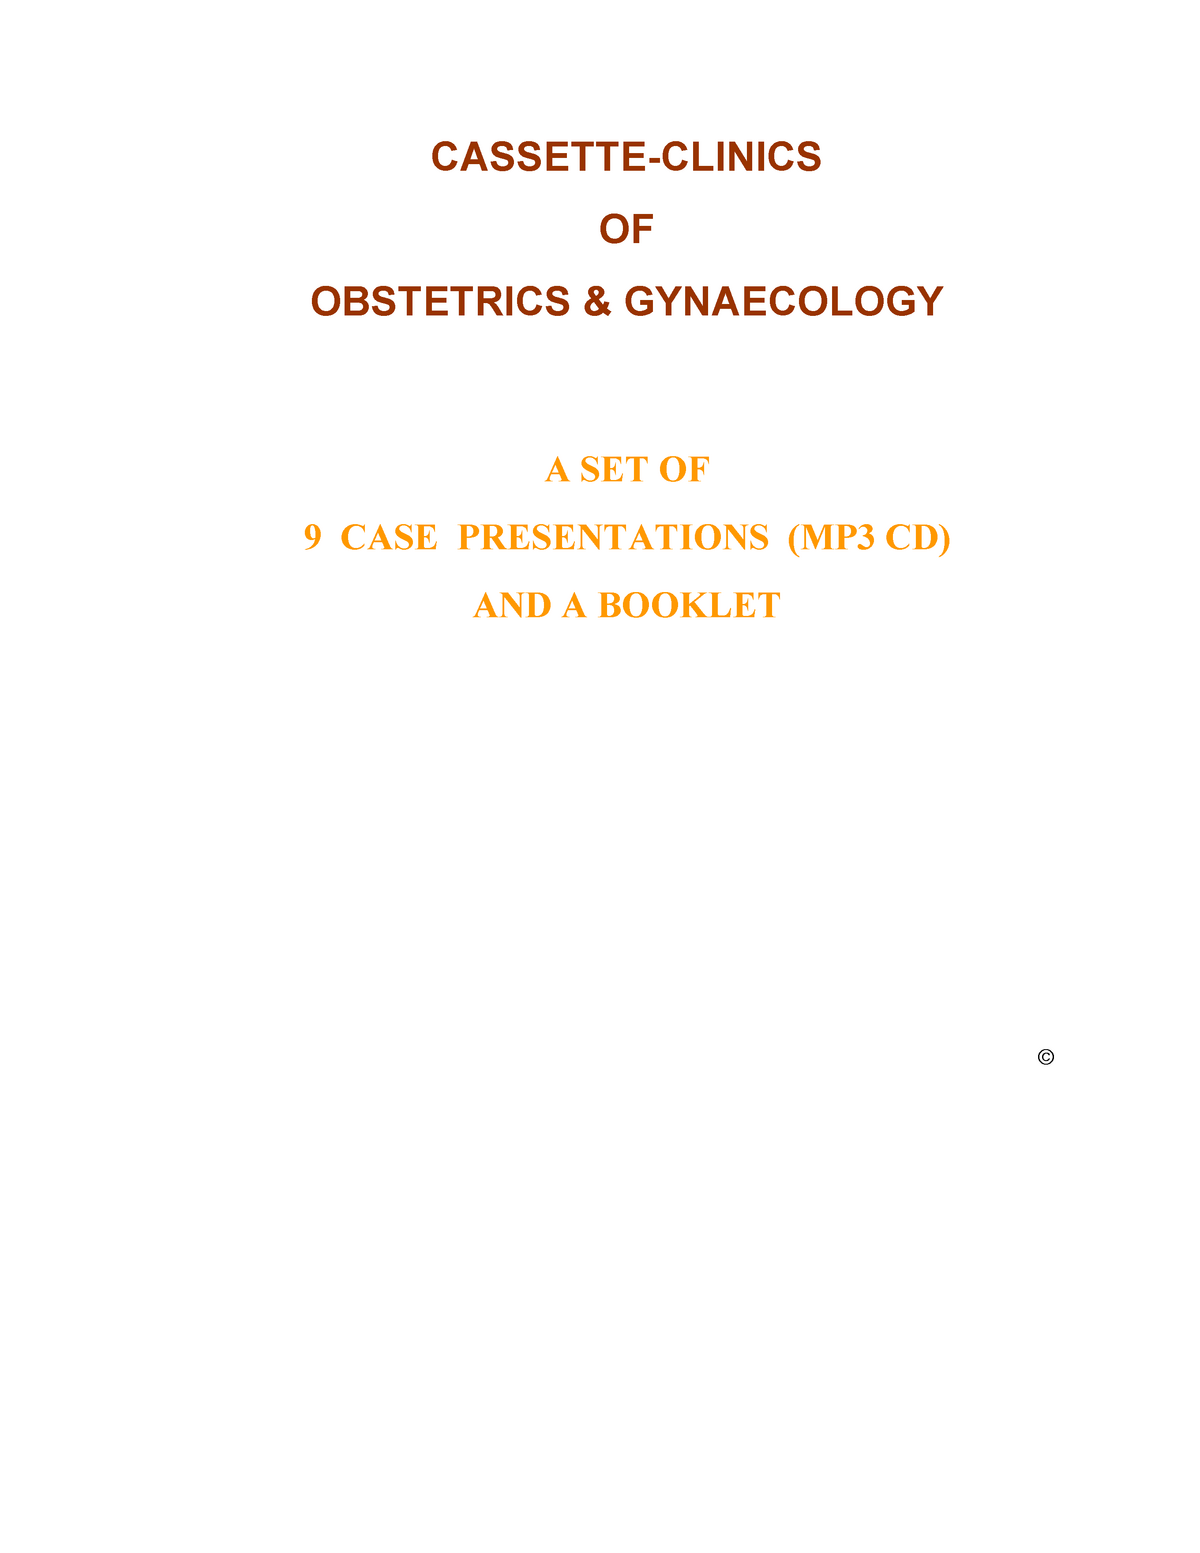 dissertation topics for obstetrics and gynaecology